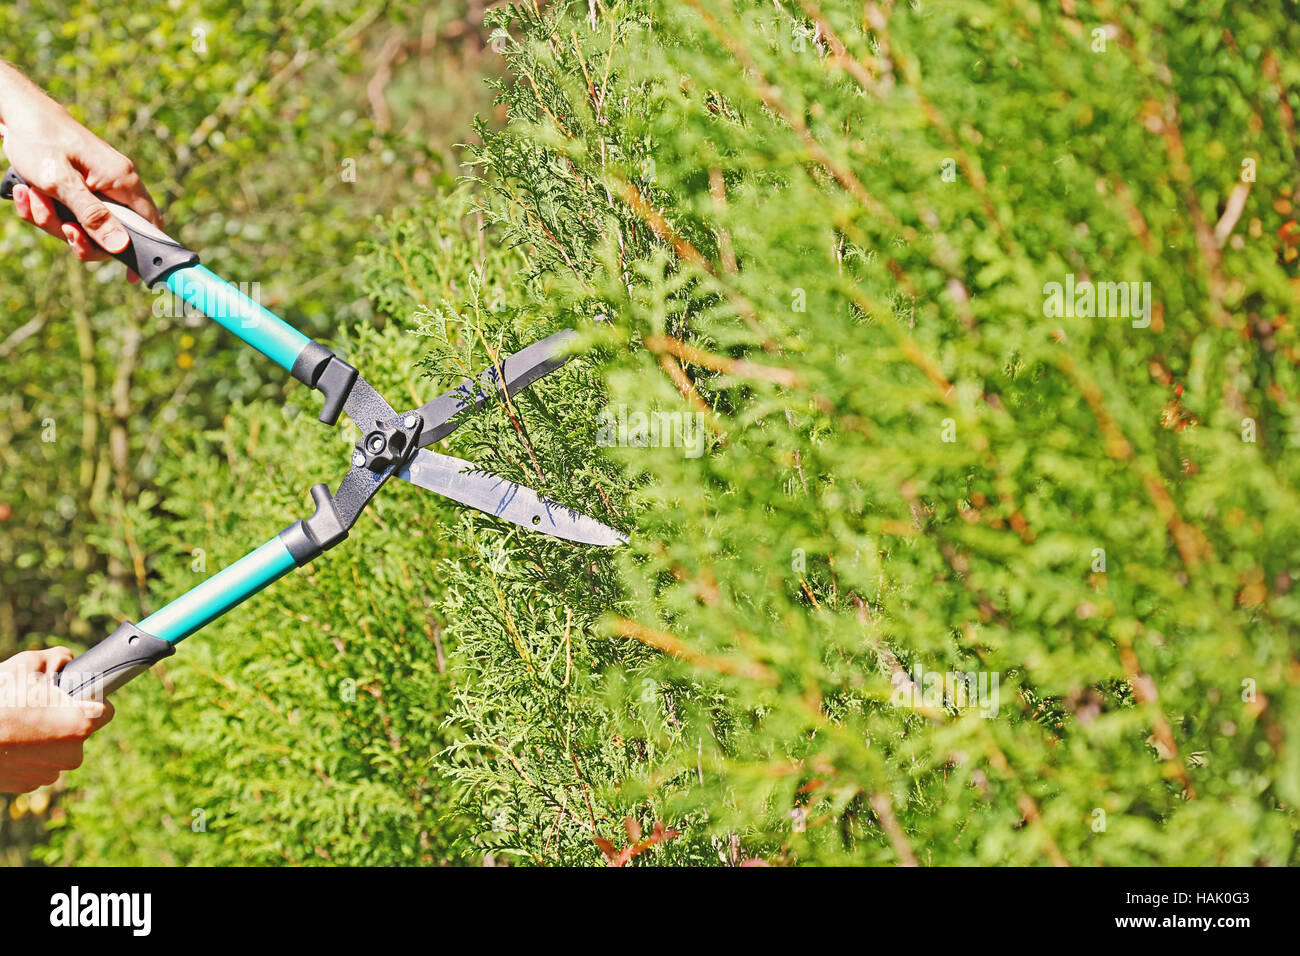 gardener trimming a hedge with pruning scissors Stock Photo